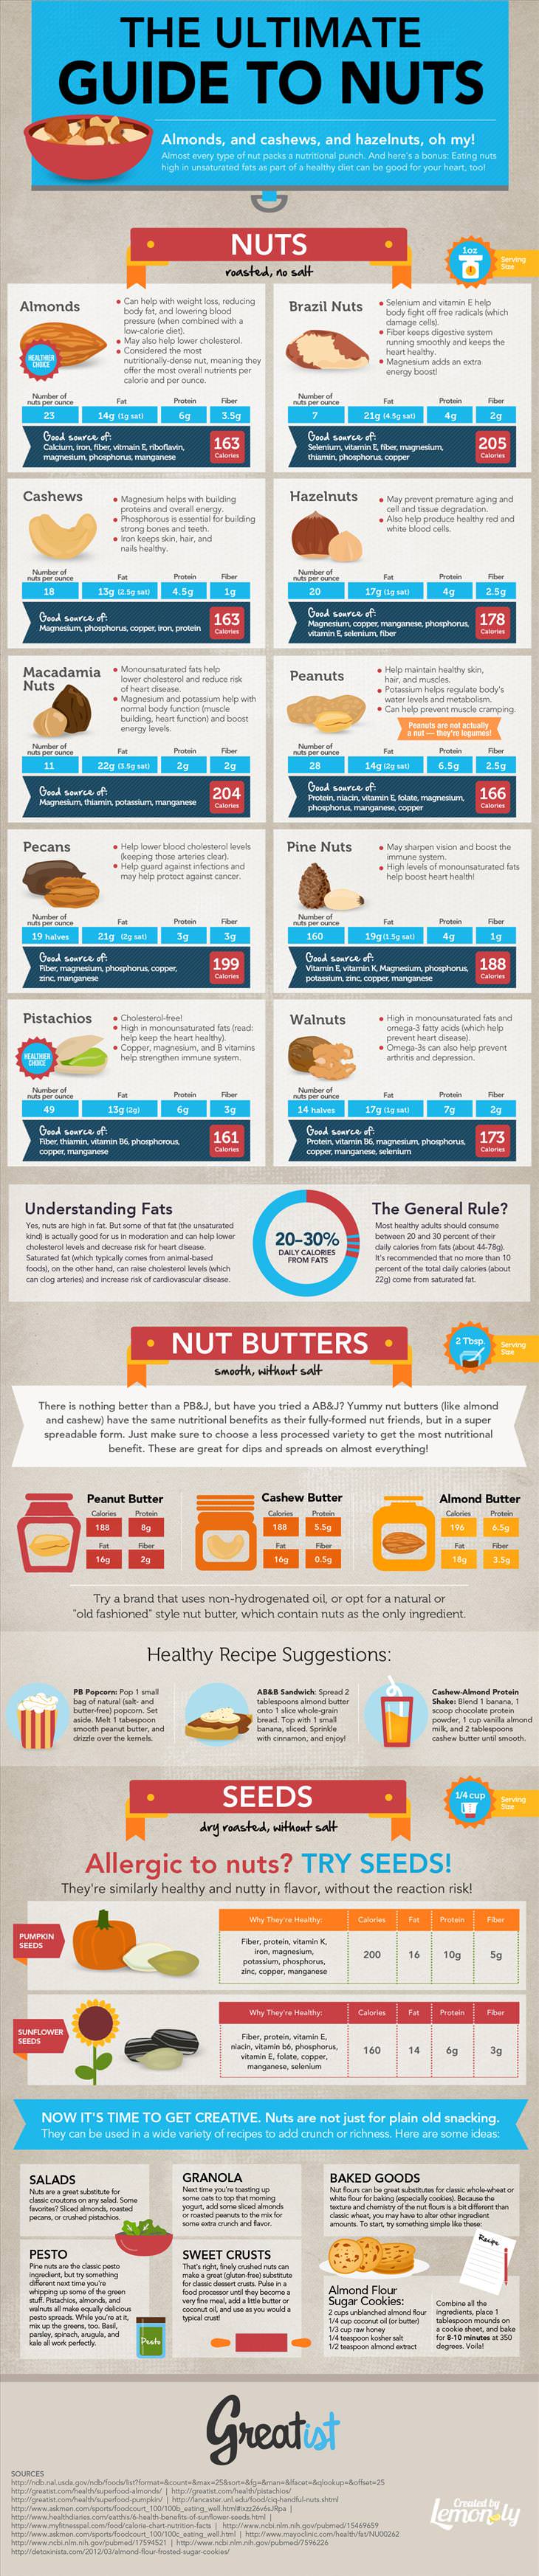 nuts guide, benefits, seeds